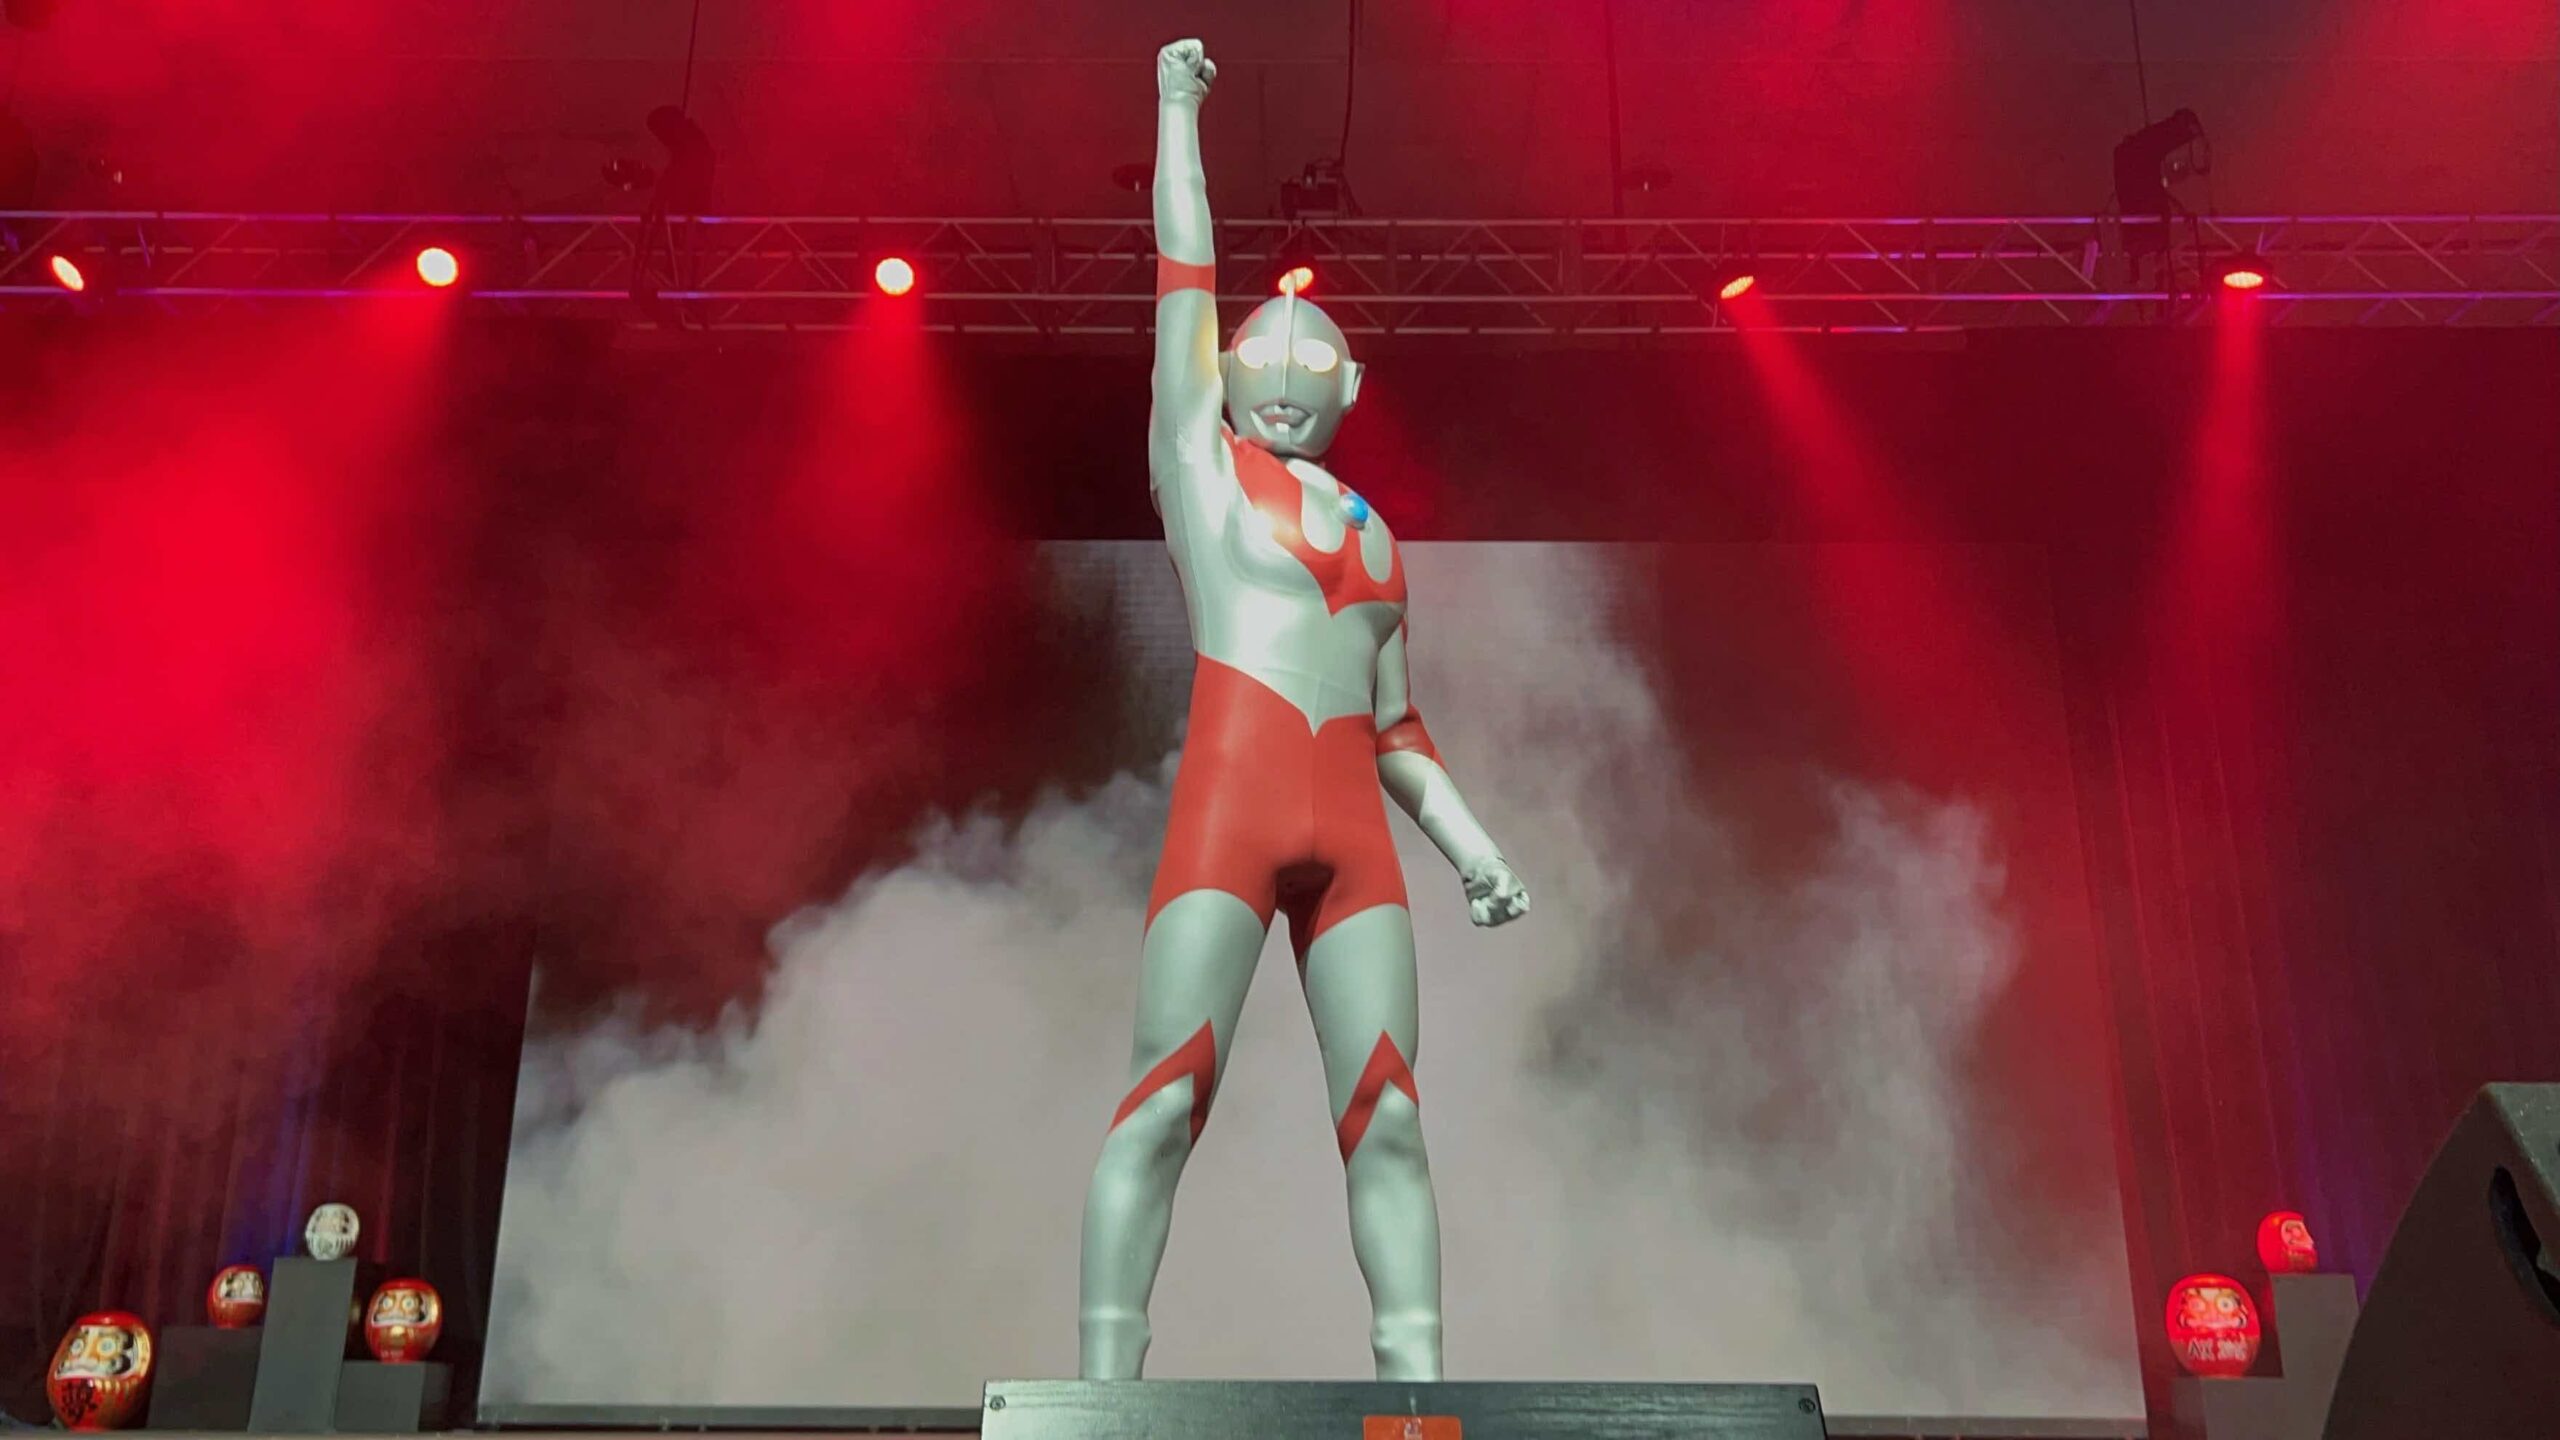 ULTRAMAN BURSTS ONTO THE WORLD STAGE AT ANIME EXPO 2022 IN LOS ANGELES